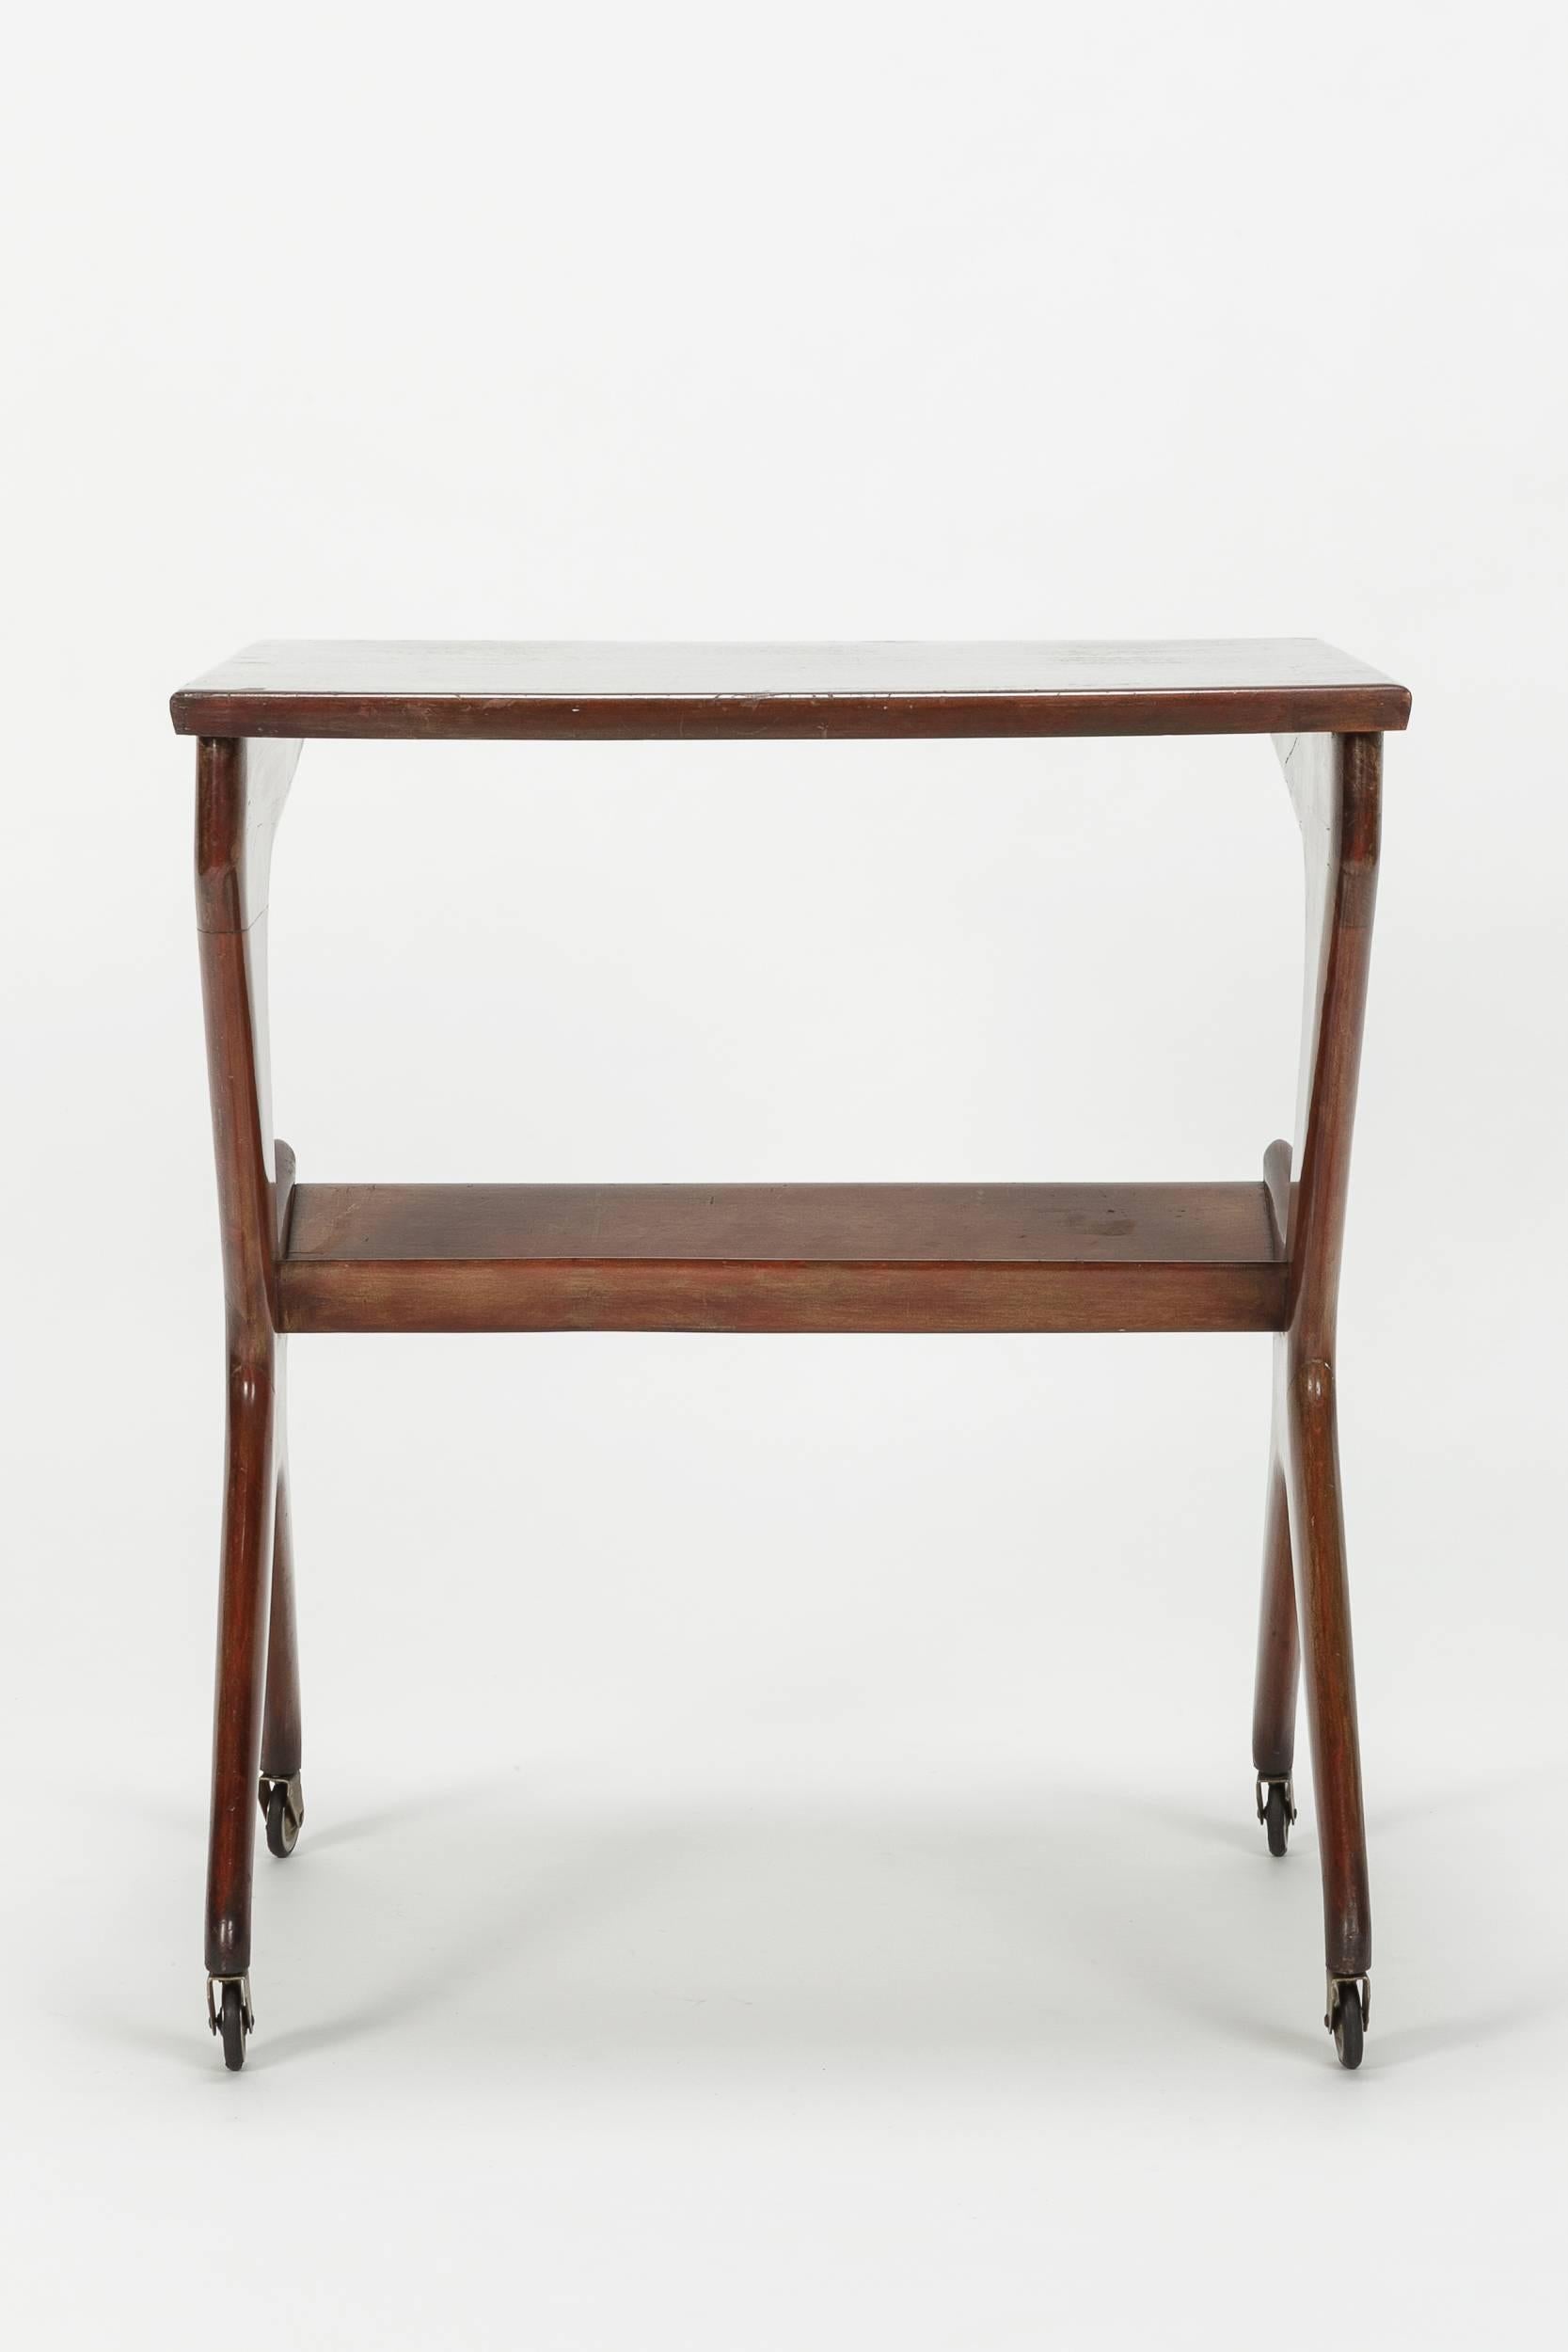 Italian Side Table Walnut Attributed to Ico Parisi, 1948